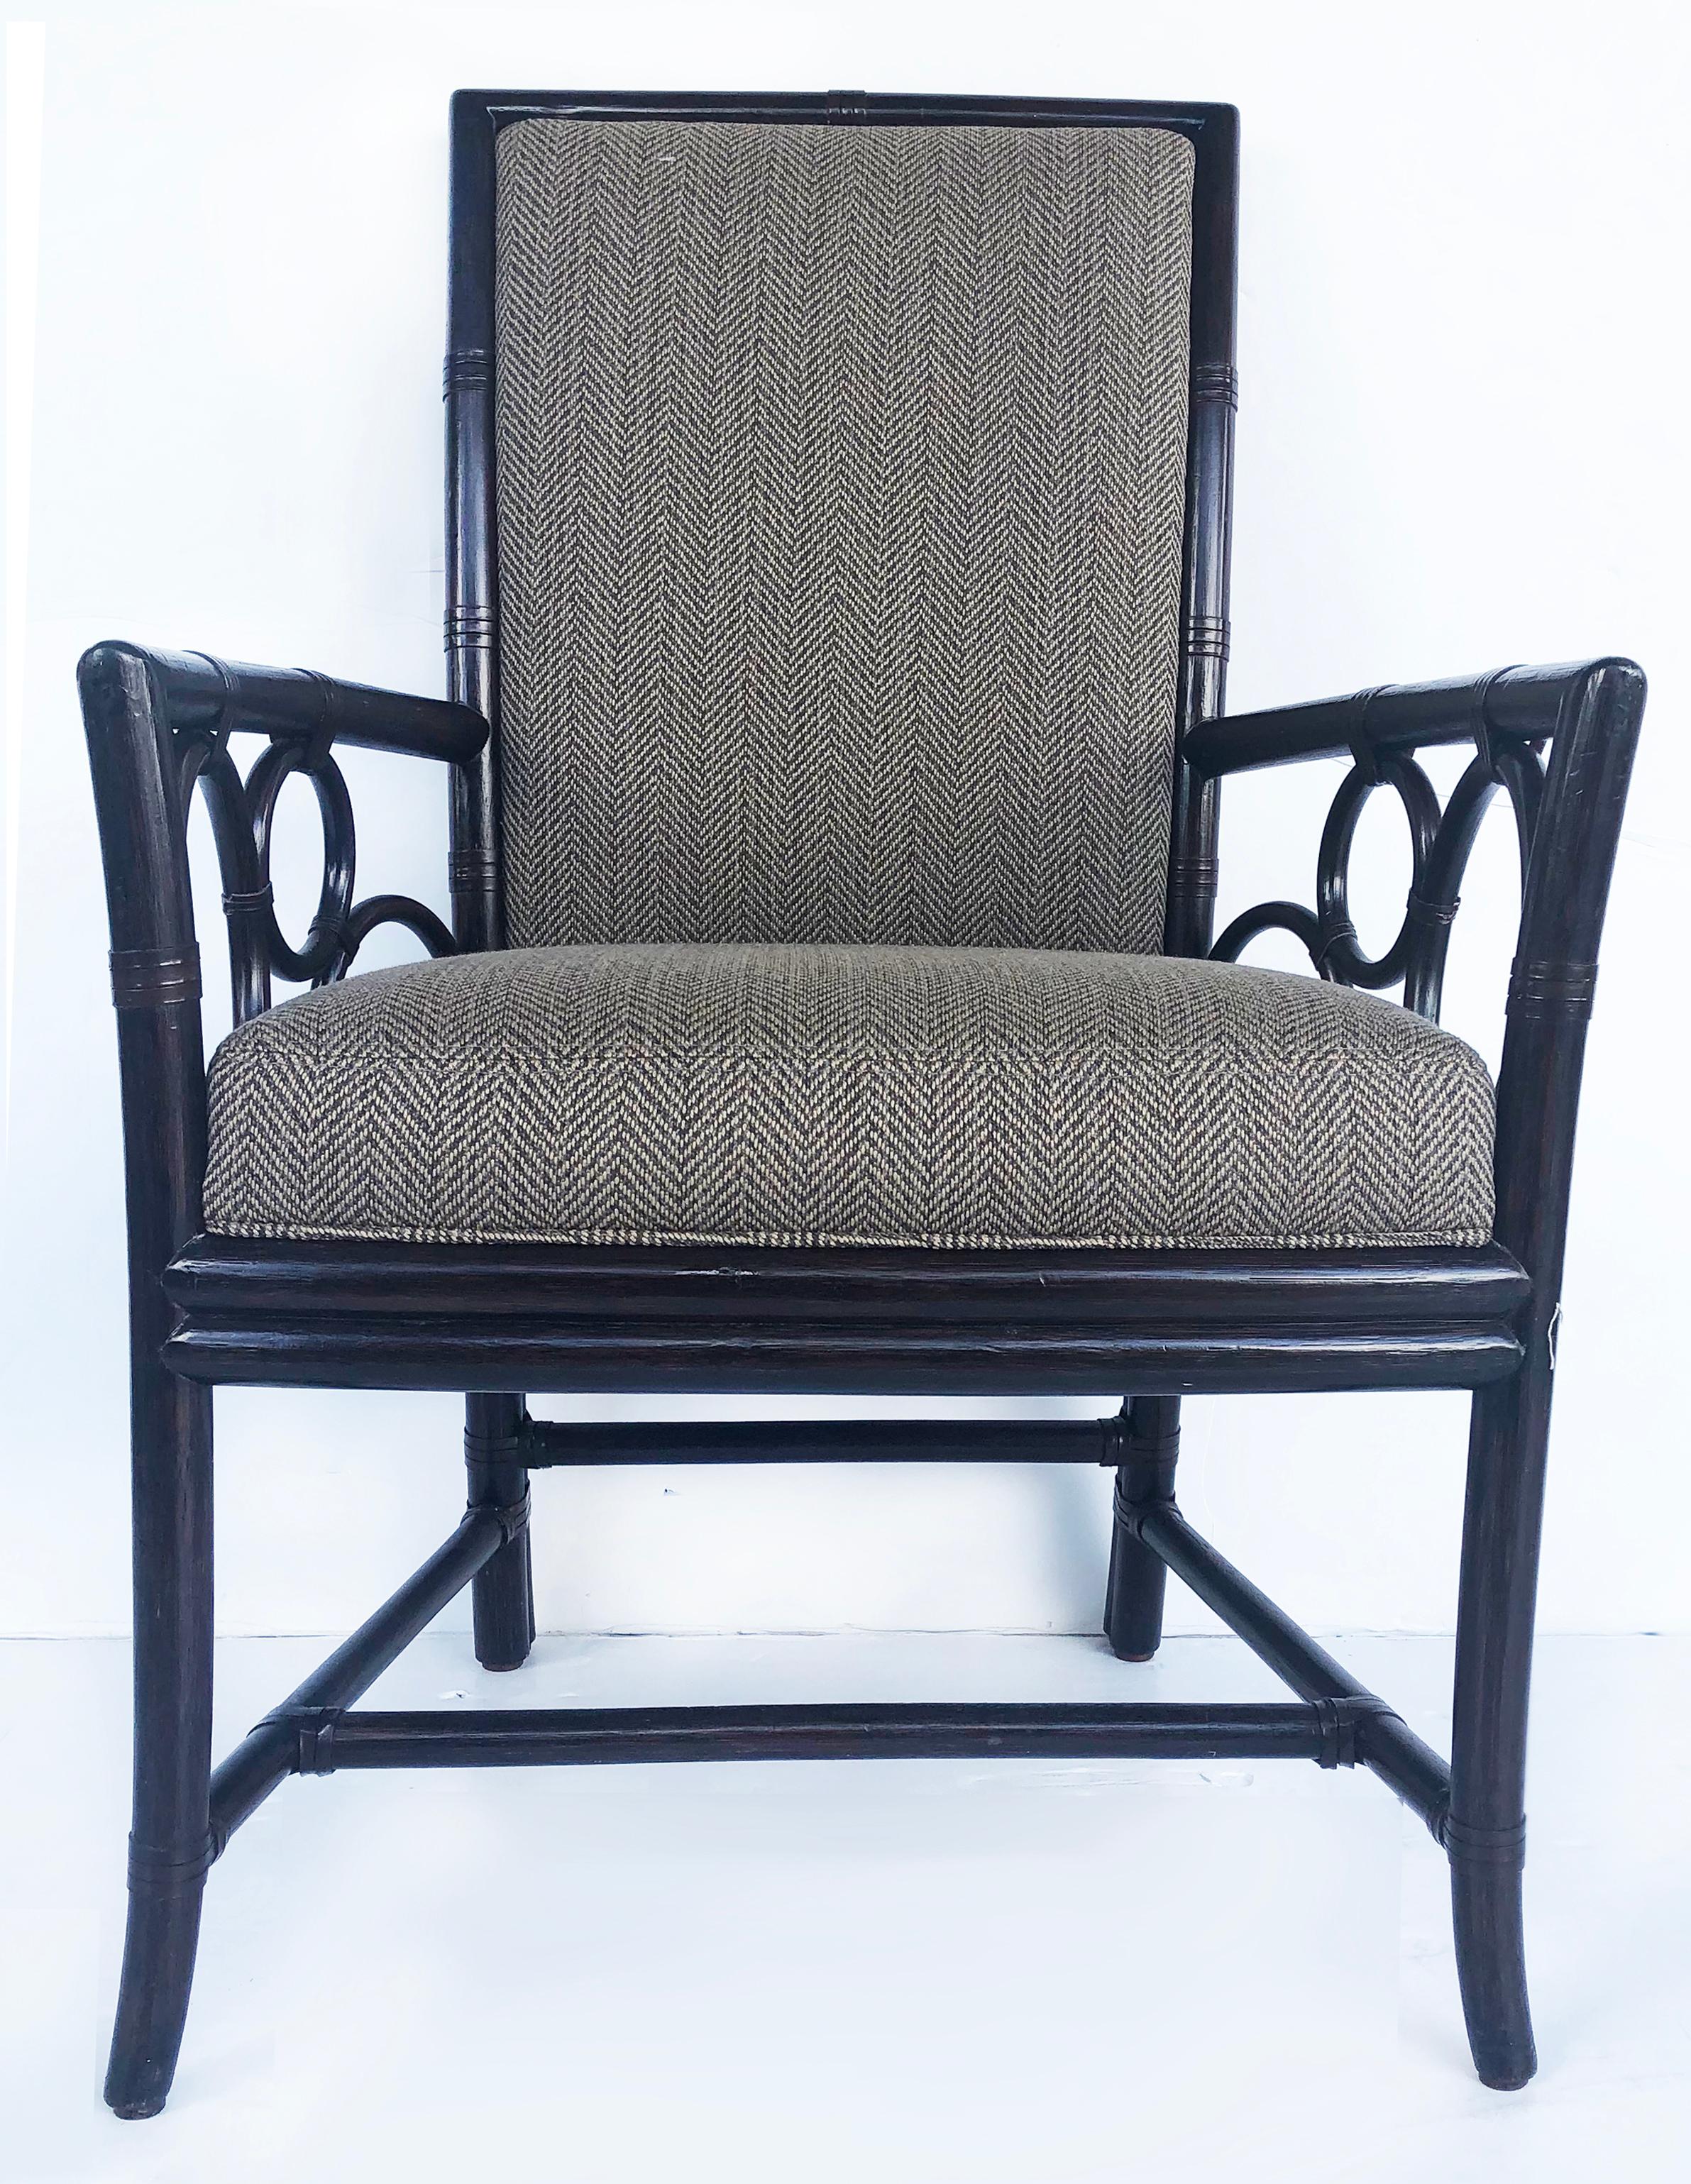 Vintage McGuire rattan armchairs, newly upholstered pair

Offered is a pair of newly upholstered rattan and leather banded armchairs by McGuire of San Francisco. The chairs have been finished in dark chocolate and reupholstered in Holly Hunt fabric.